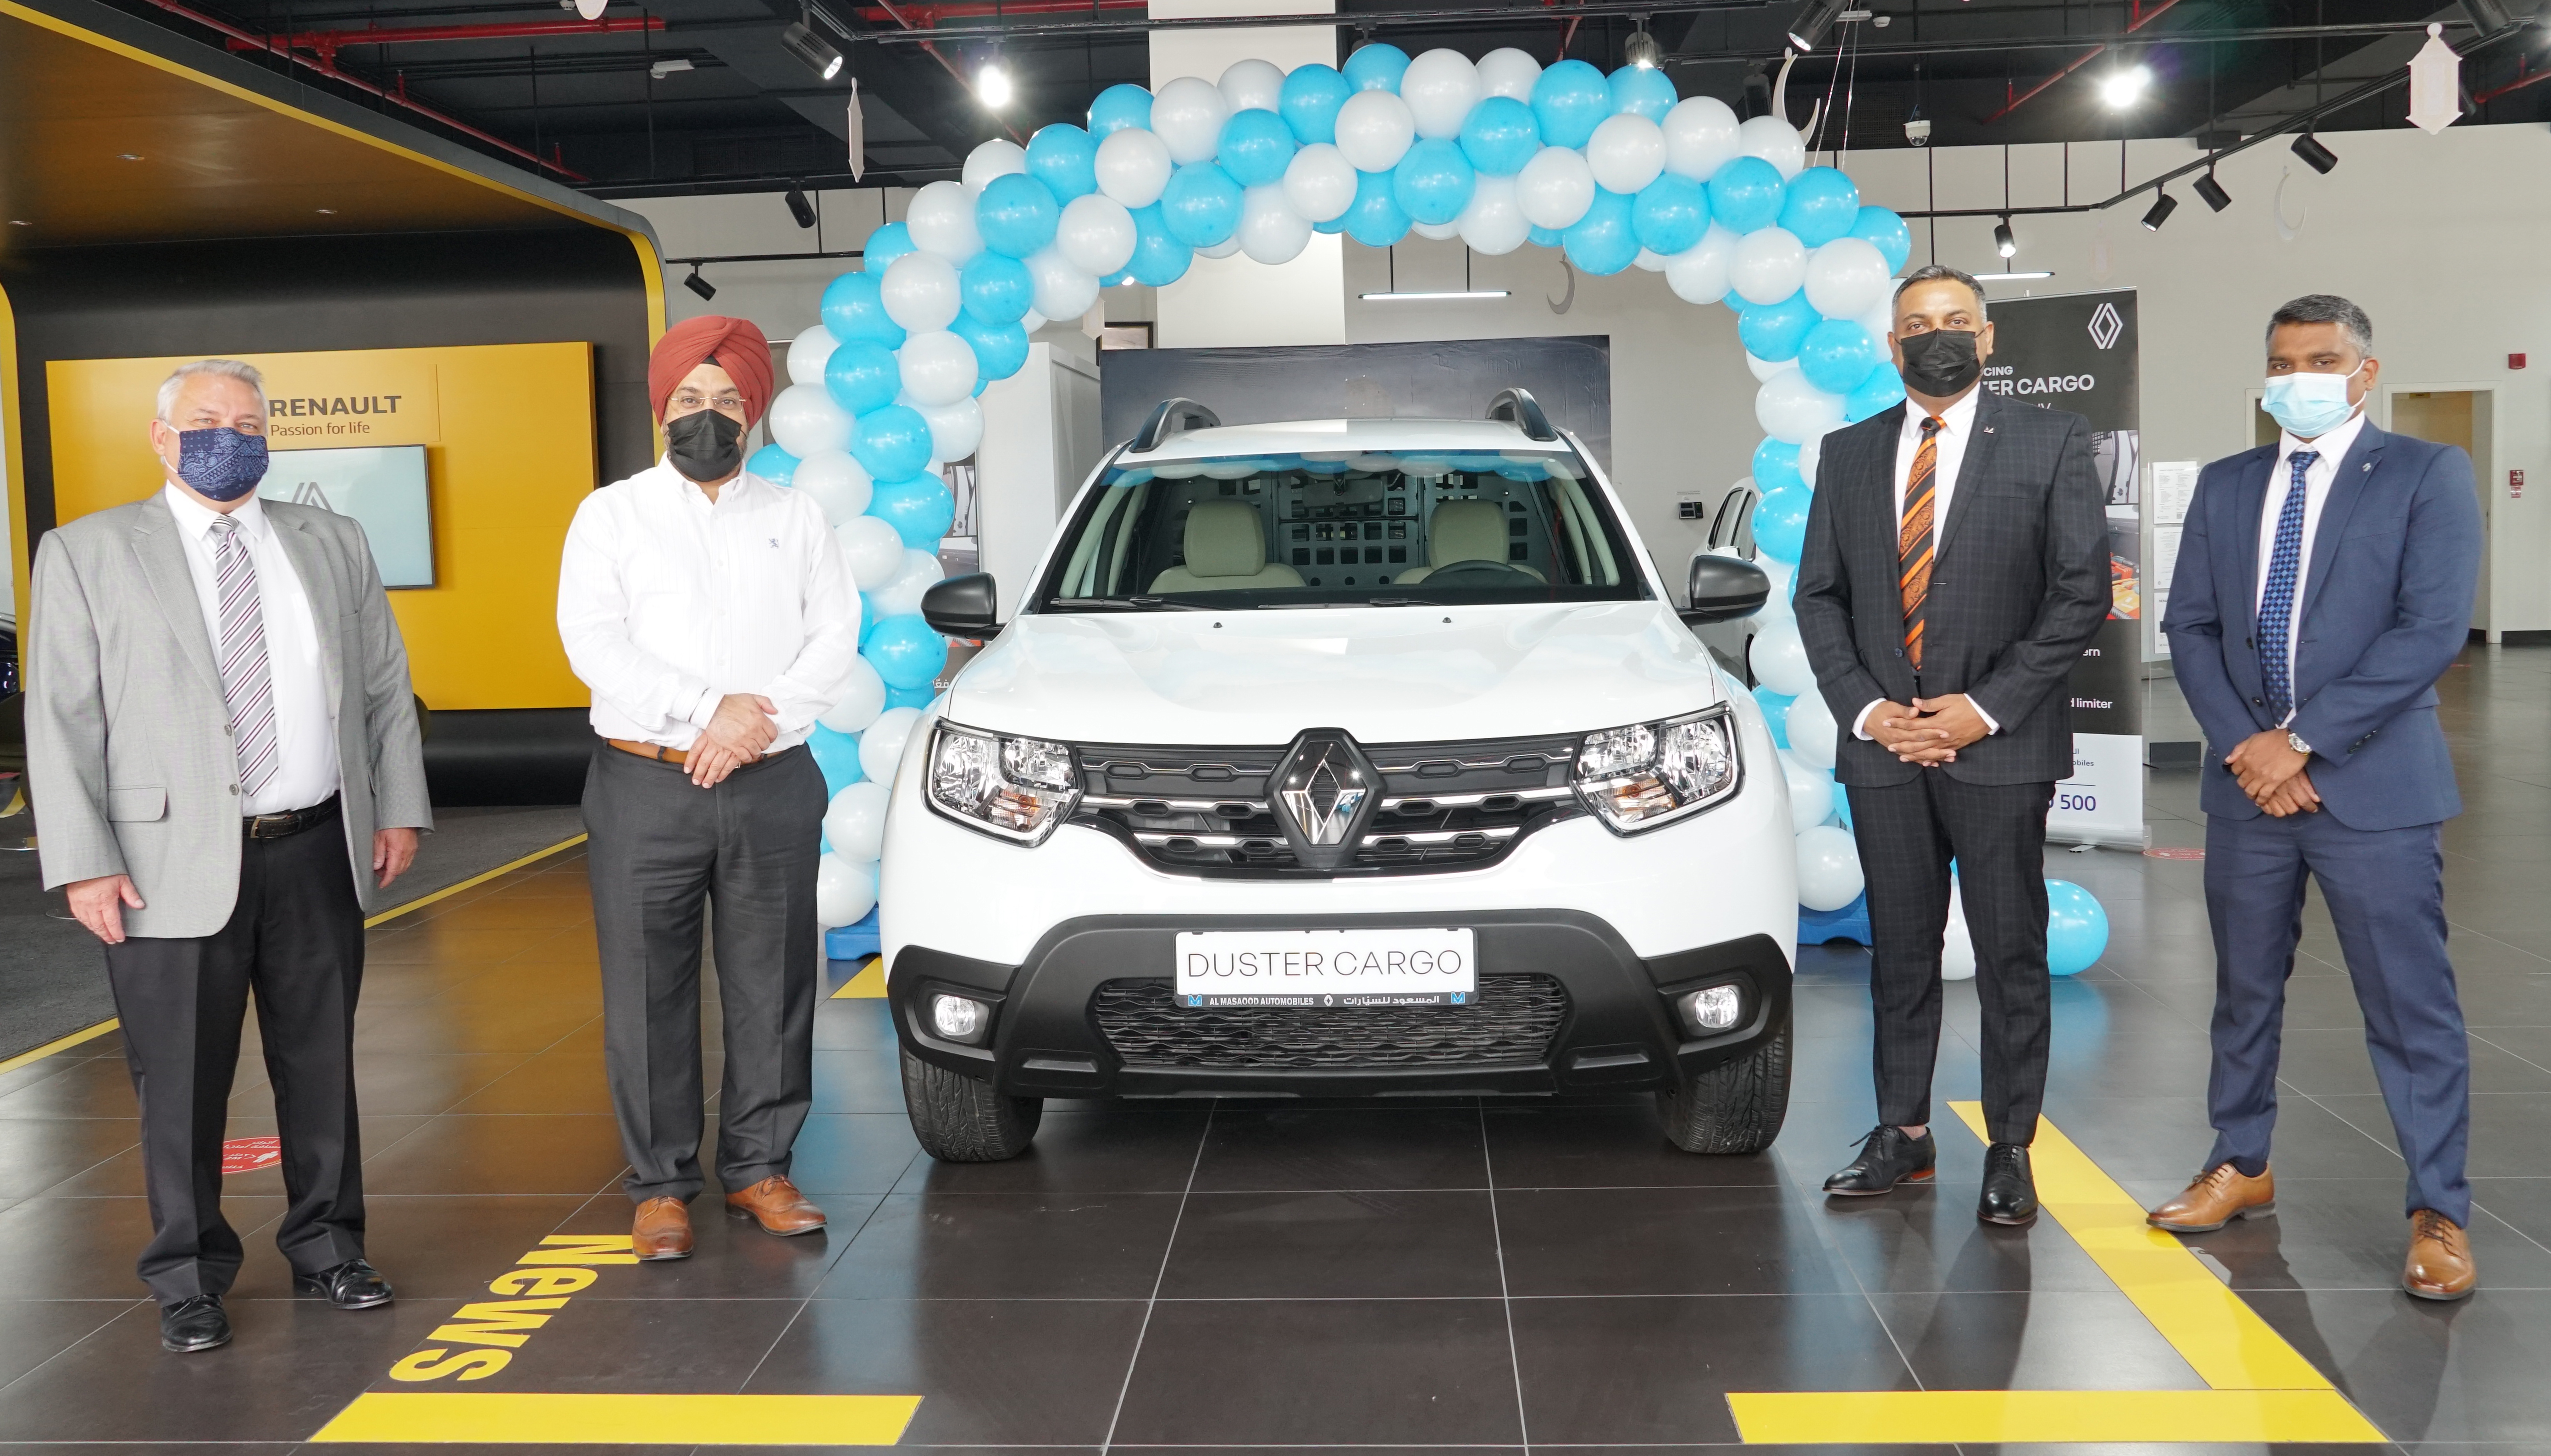 Al Masaood Automobiles innovates to respond to strong demand for last mile services, launches Renault Duster Cargo model